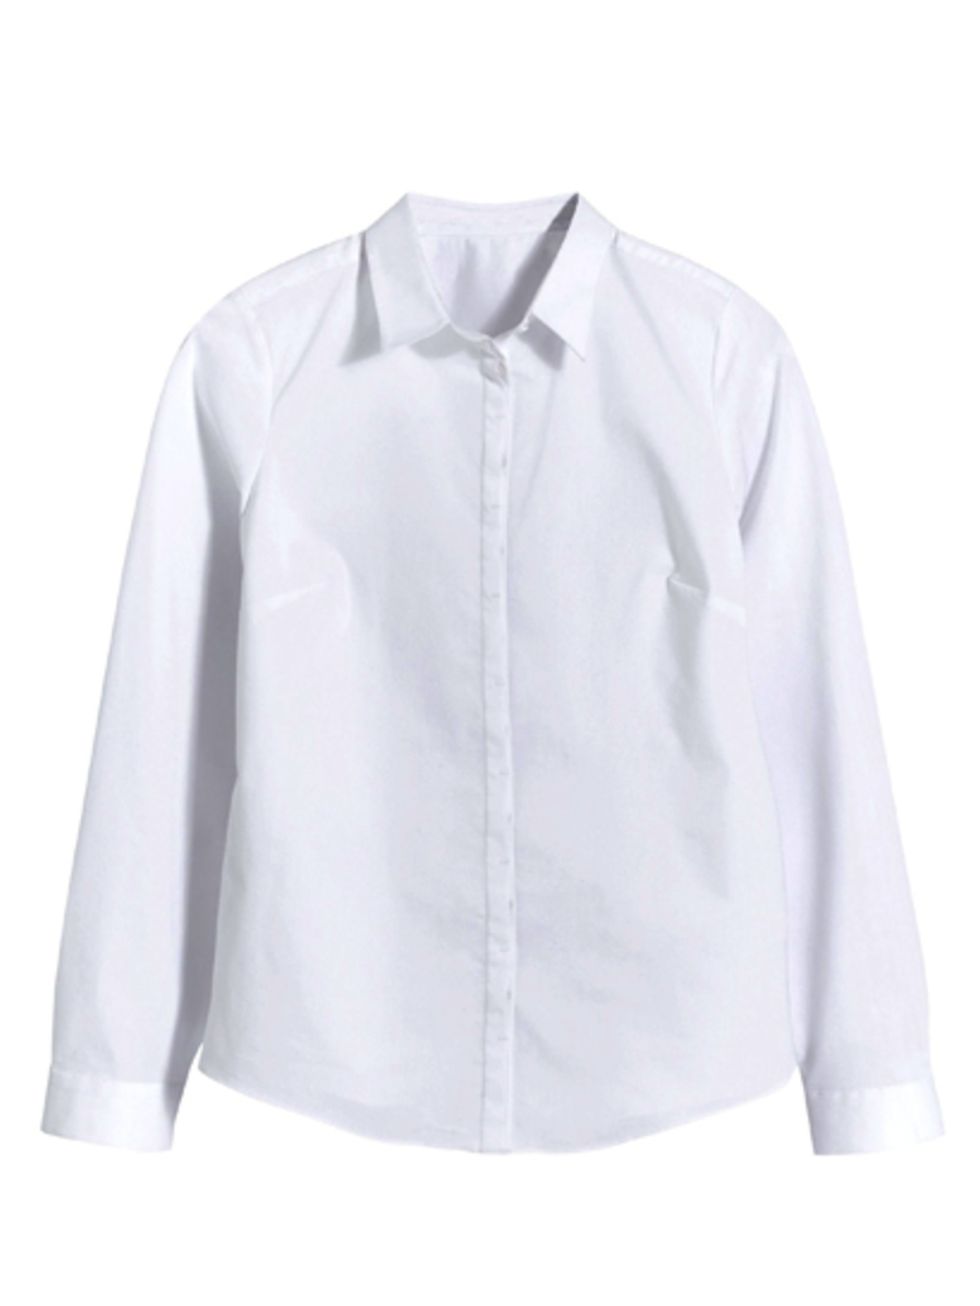 <p>Starting with the signature classic white shirt, £20 at <a href="http://www.next.co.uk/x5458s2#675571x54">Next</a>.</p>